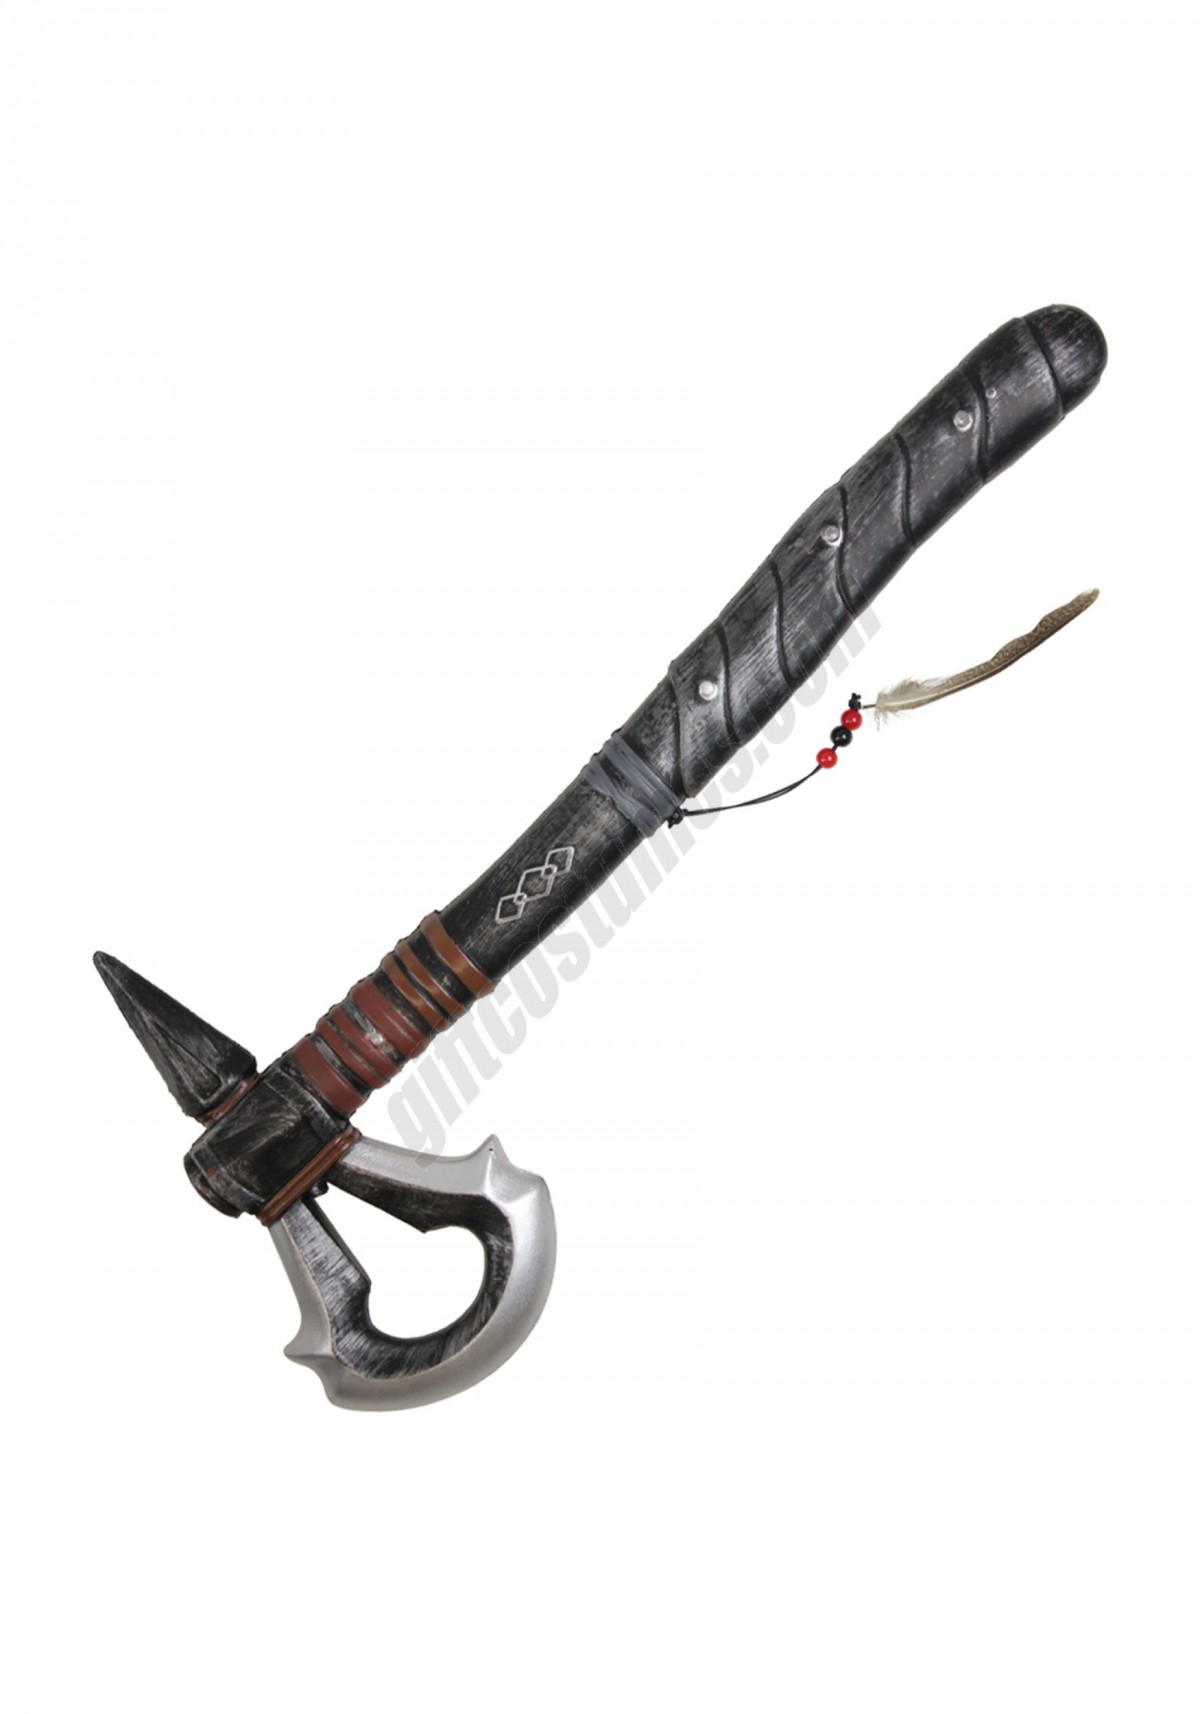 Assassin's Creed Connor's Tomahawk Foam Axe Promotions - -0